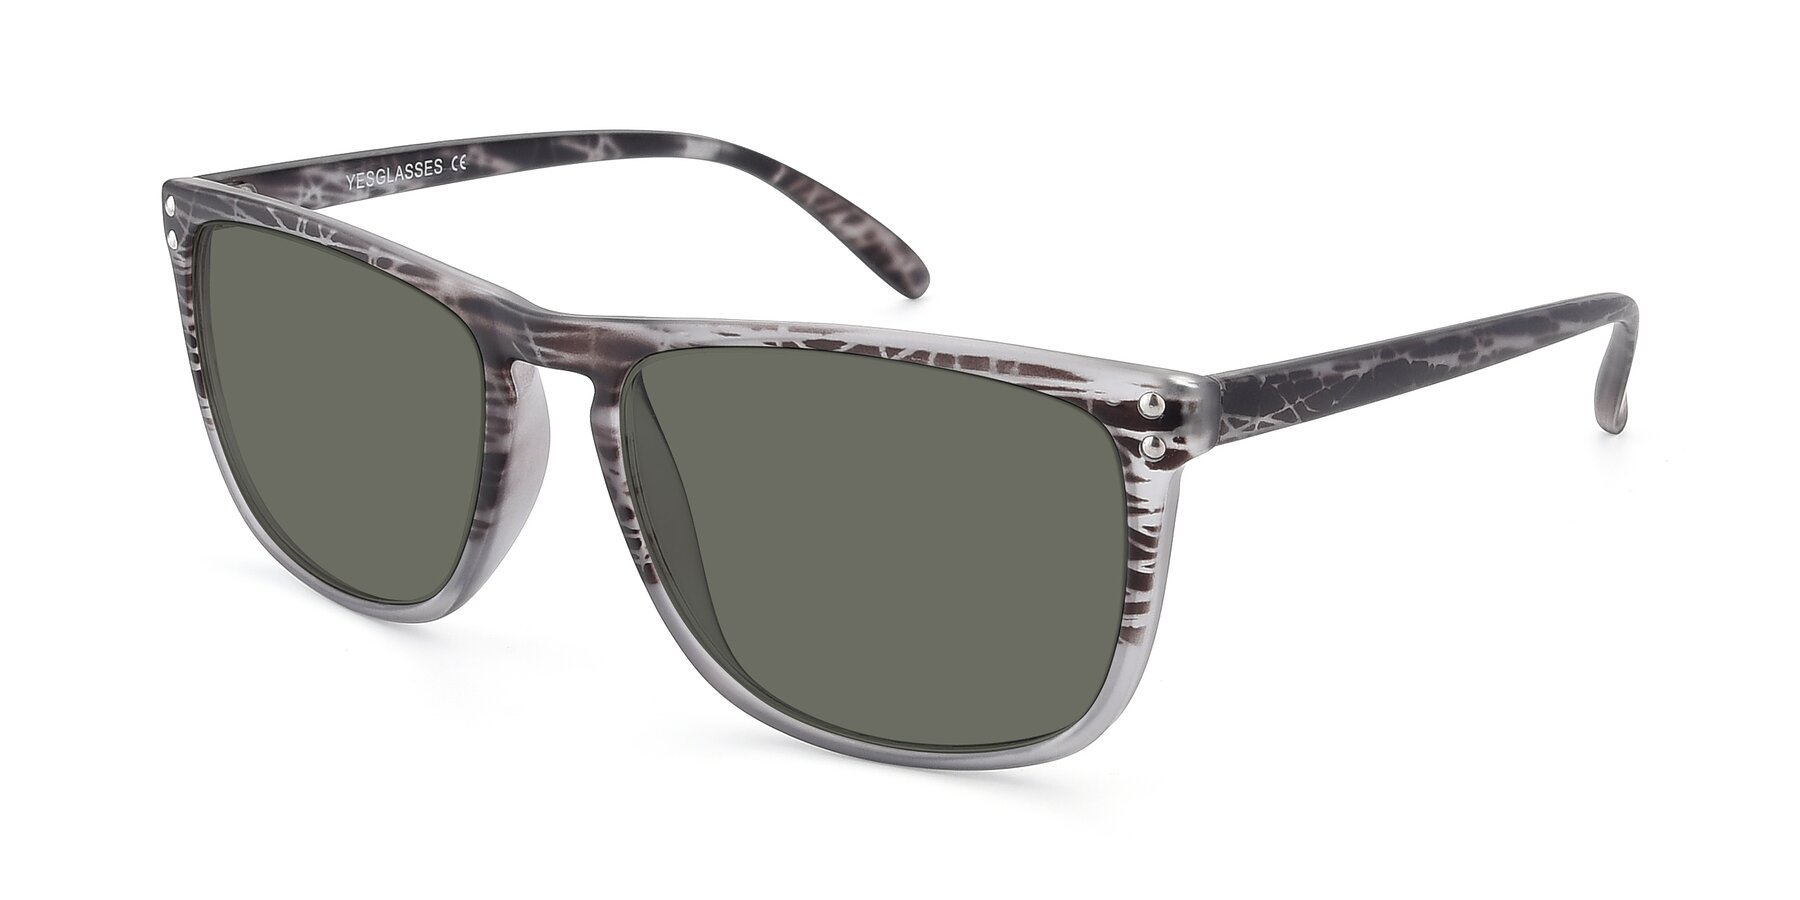 Angle of SSR411 in Translucent Floral Grey with Gray Polarized Lenses